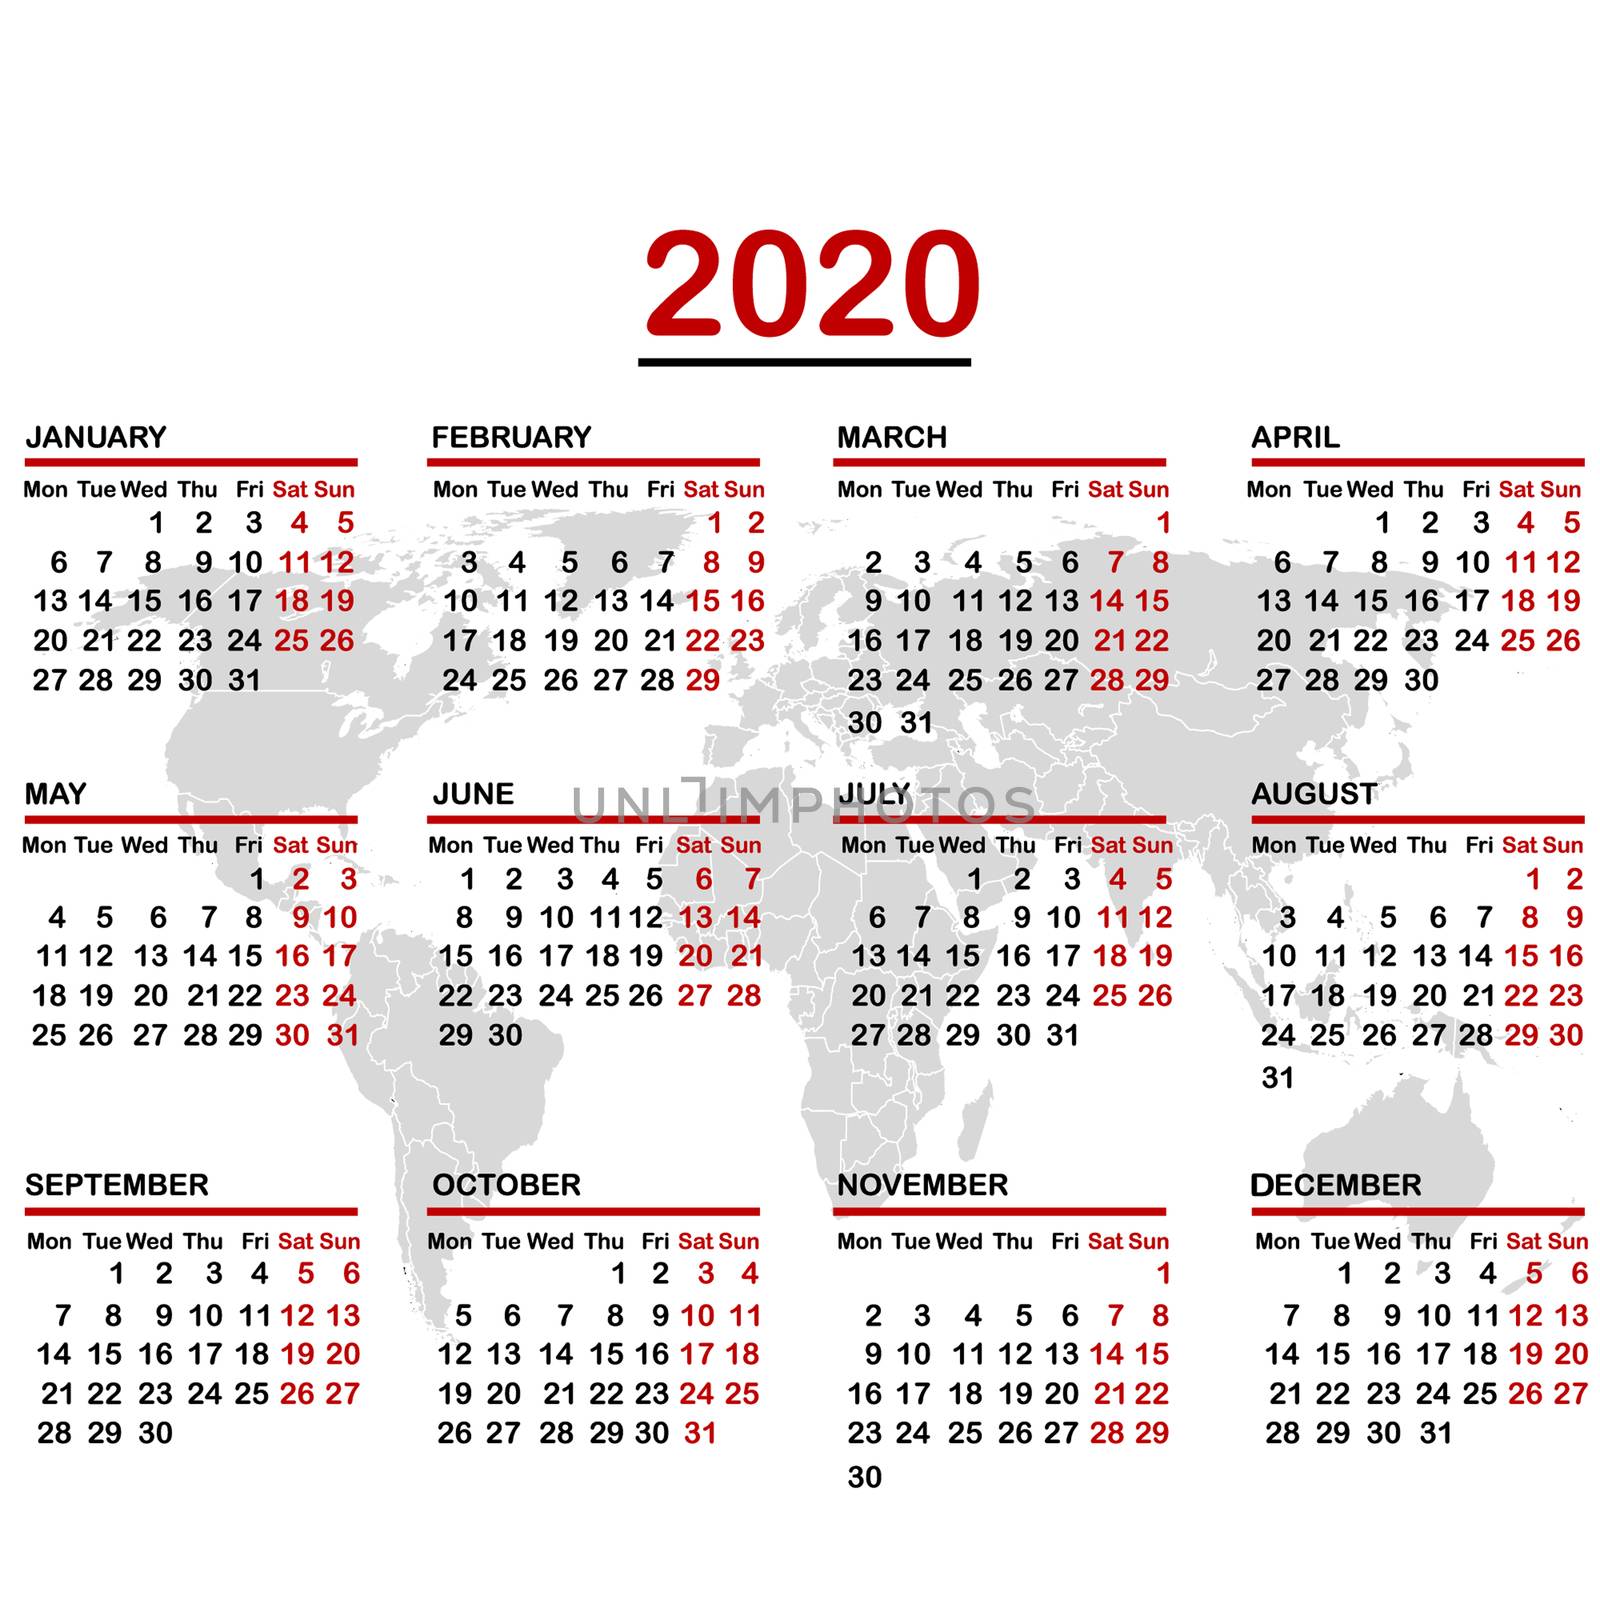 2020 calendar with world map by hibrida13